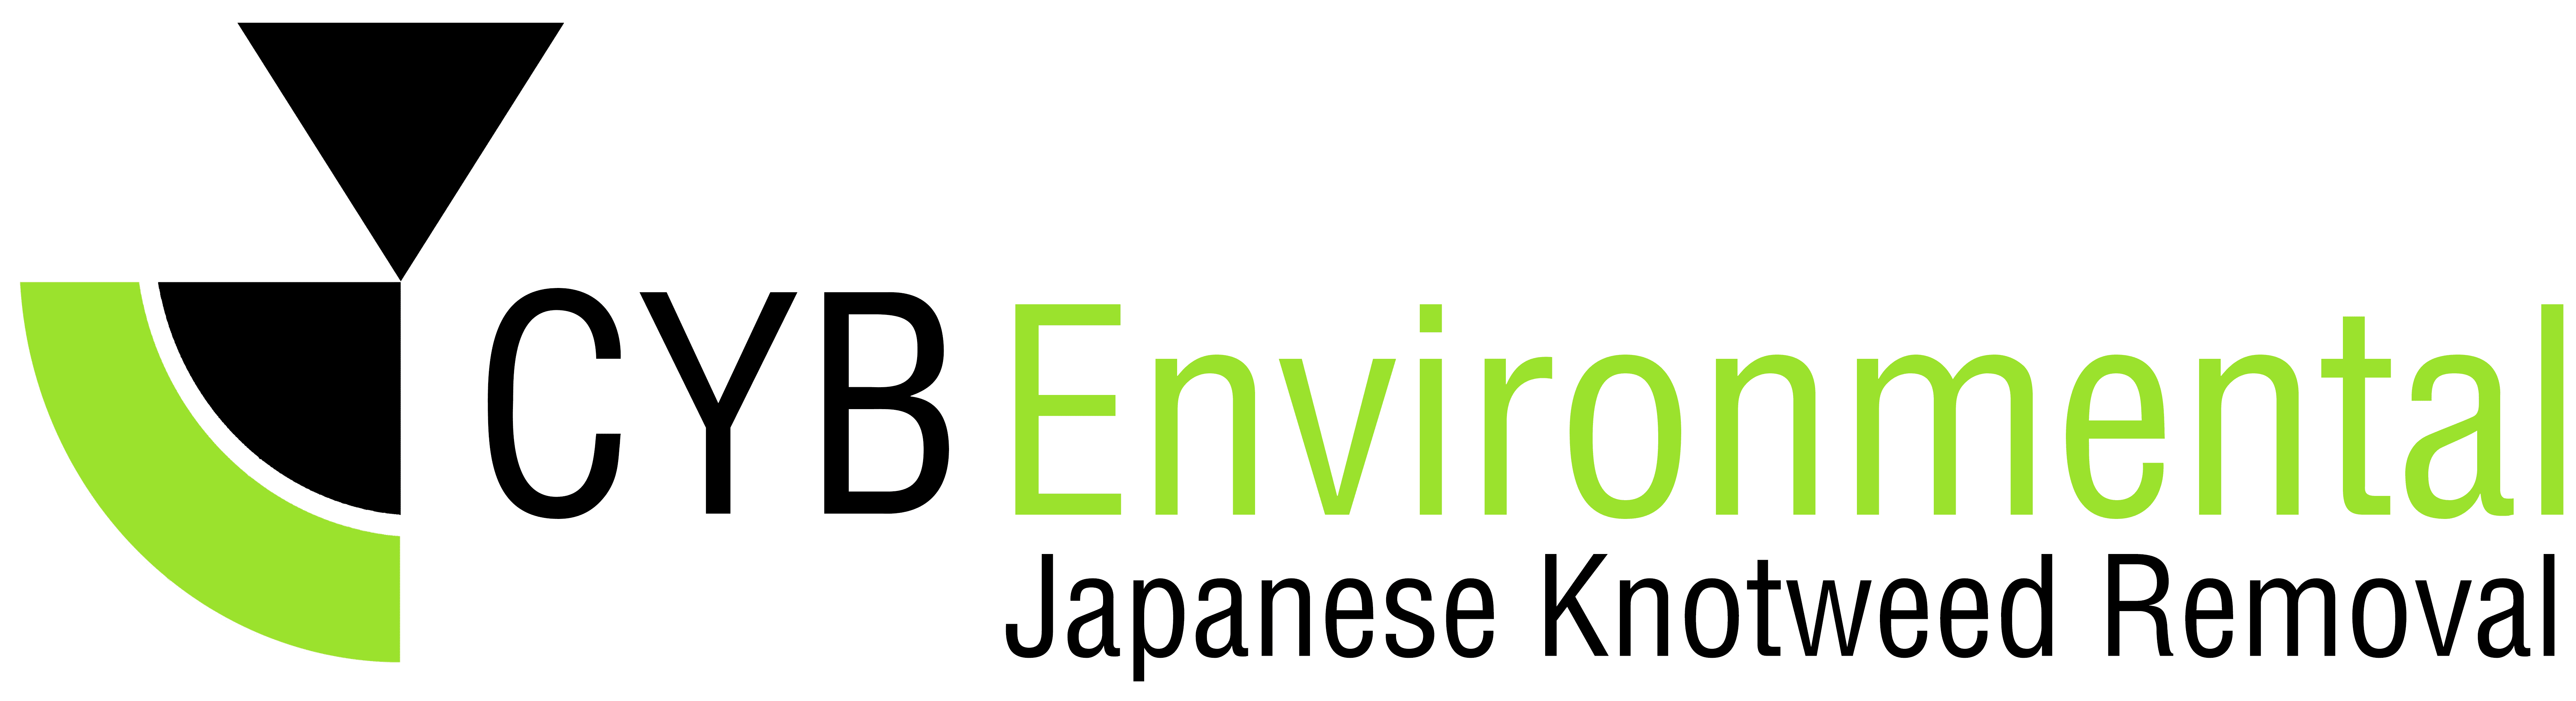 CYB environmental logo - japanese knotweed removal specialists based in london cardiff & bristol